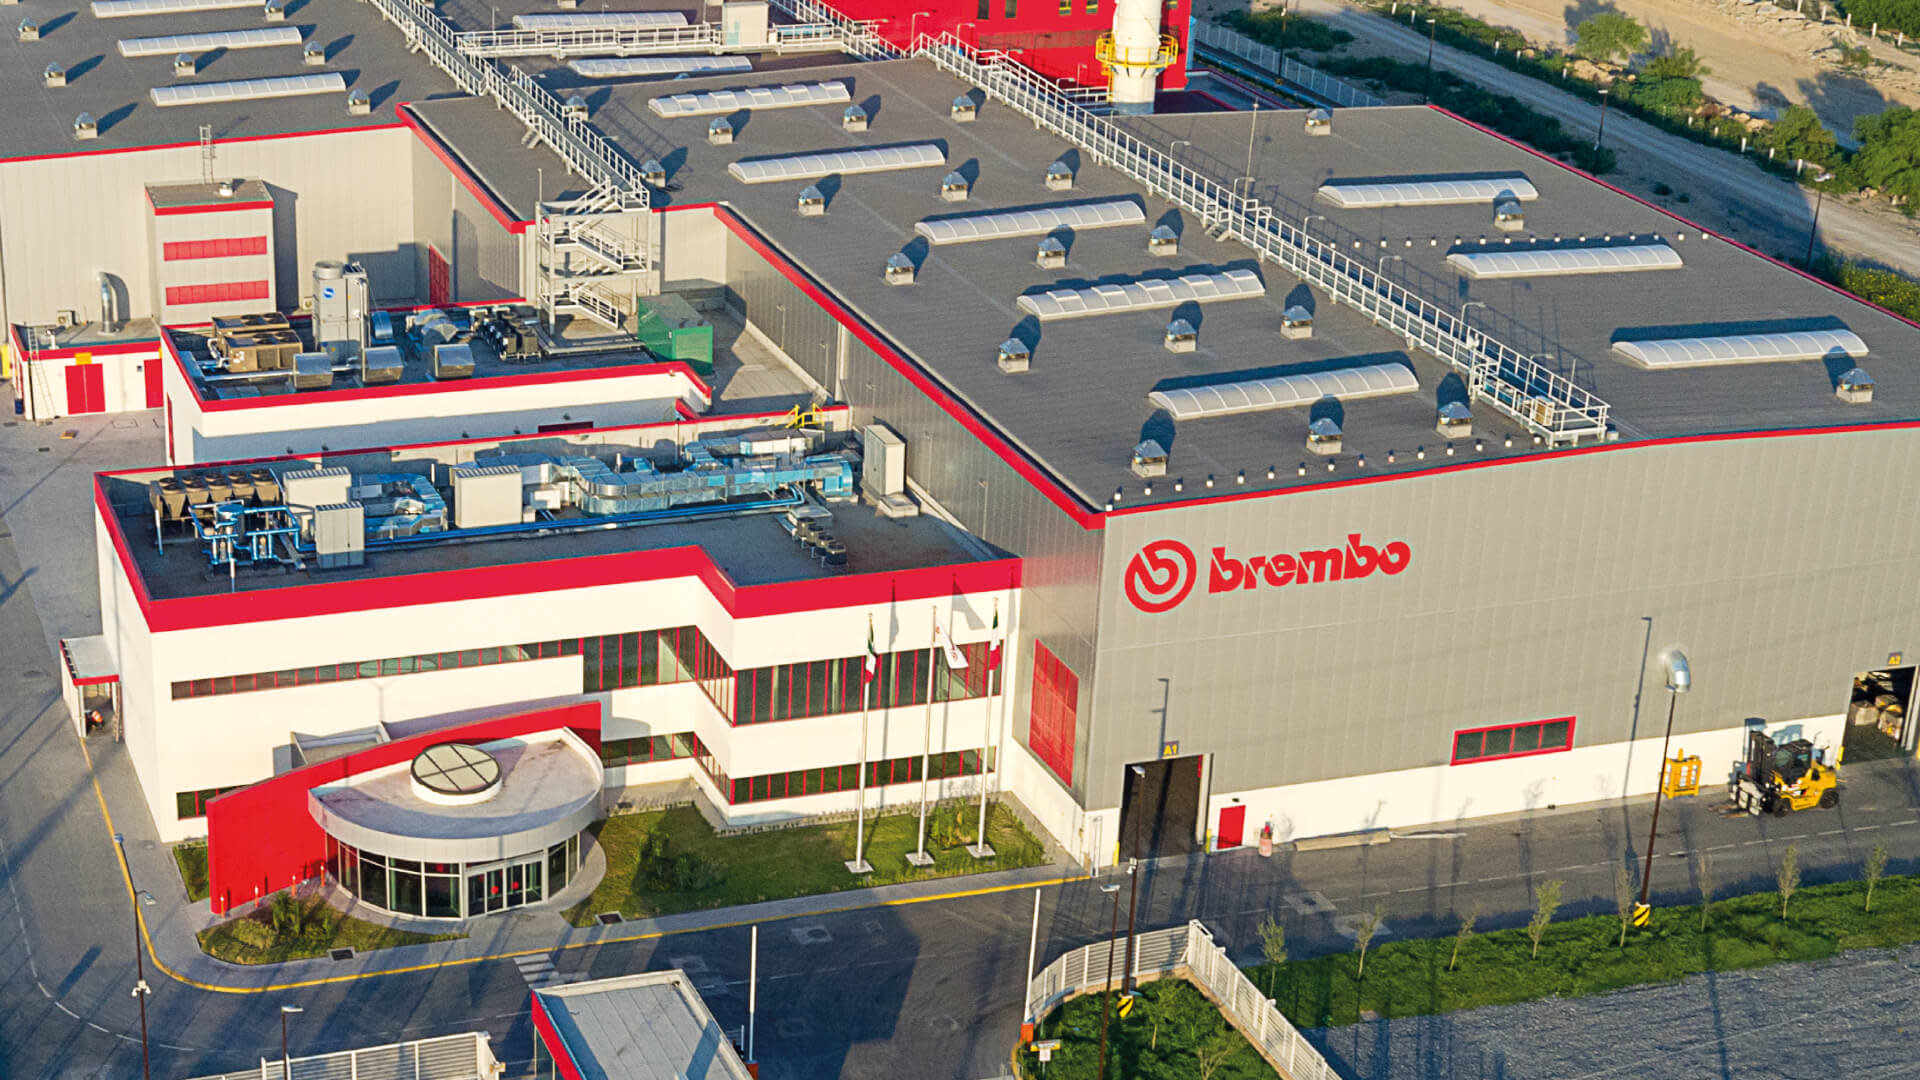 Aerial view of Brembo's factory